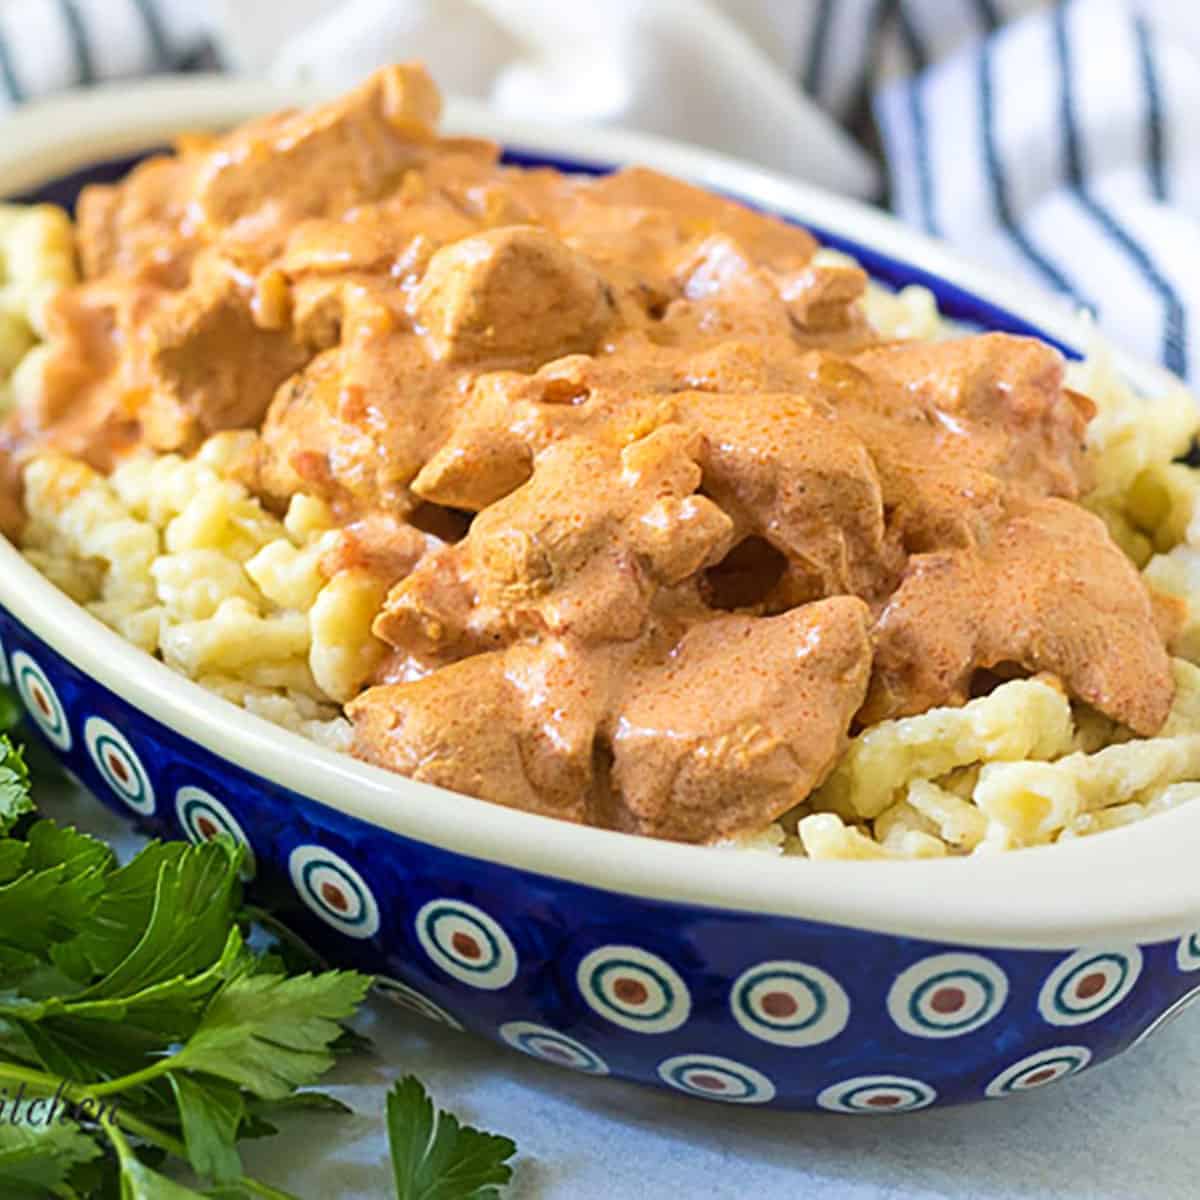 Blue and white dish filed with homemade chicken paprikash and spaetzle.